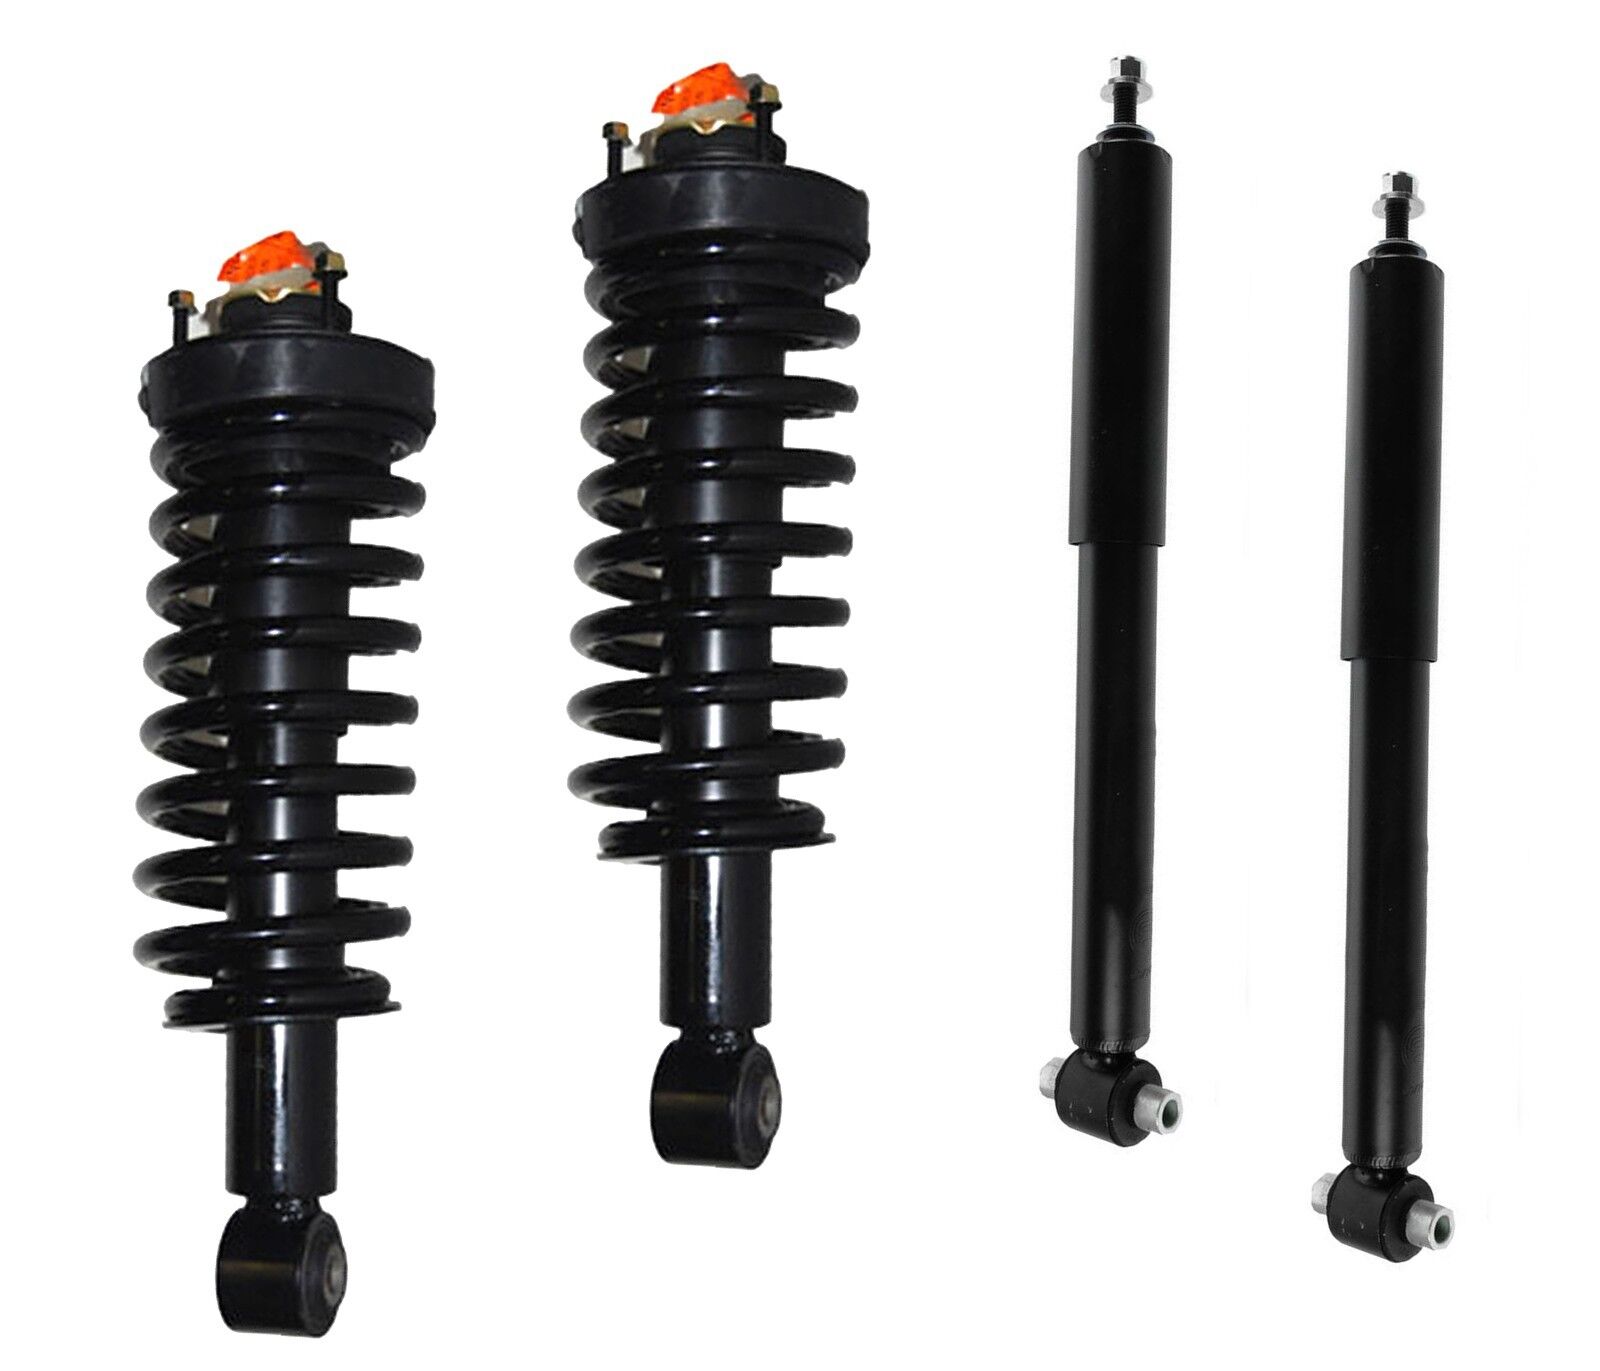 2 Front Complete Struts Springs + 2 Rear Shocks Fit 2000-2006 Toyota Tundra 2WD